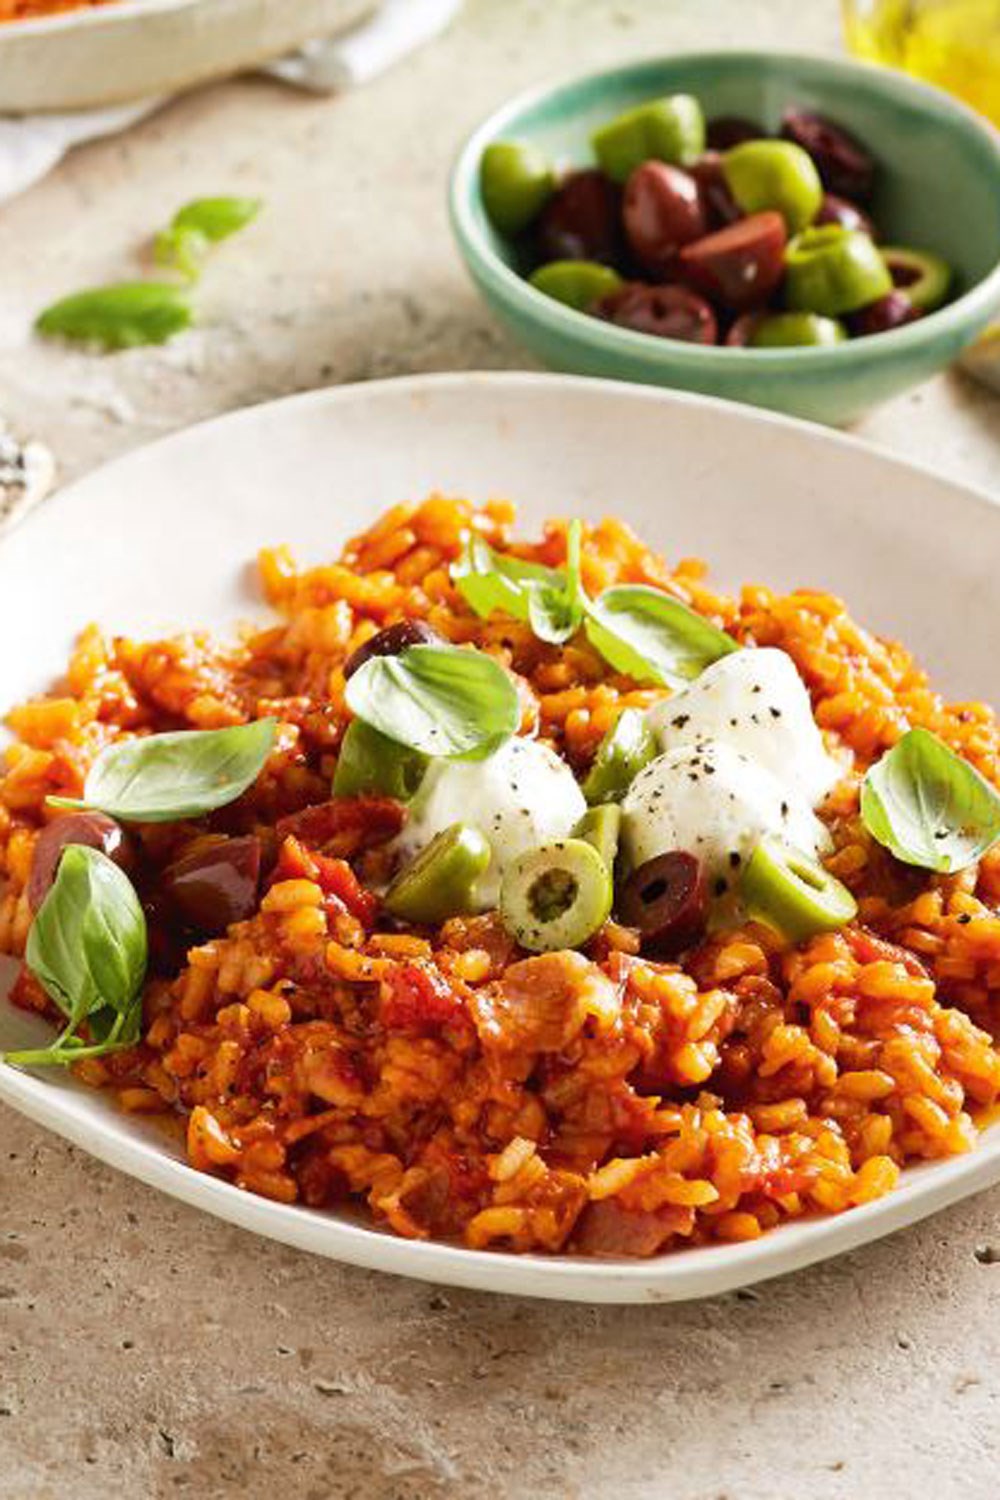 15 Deliciously Creamy Risotto Recipes Made Simple | Better Homes and ...